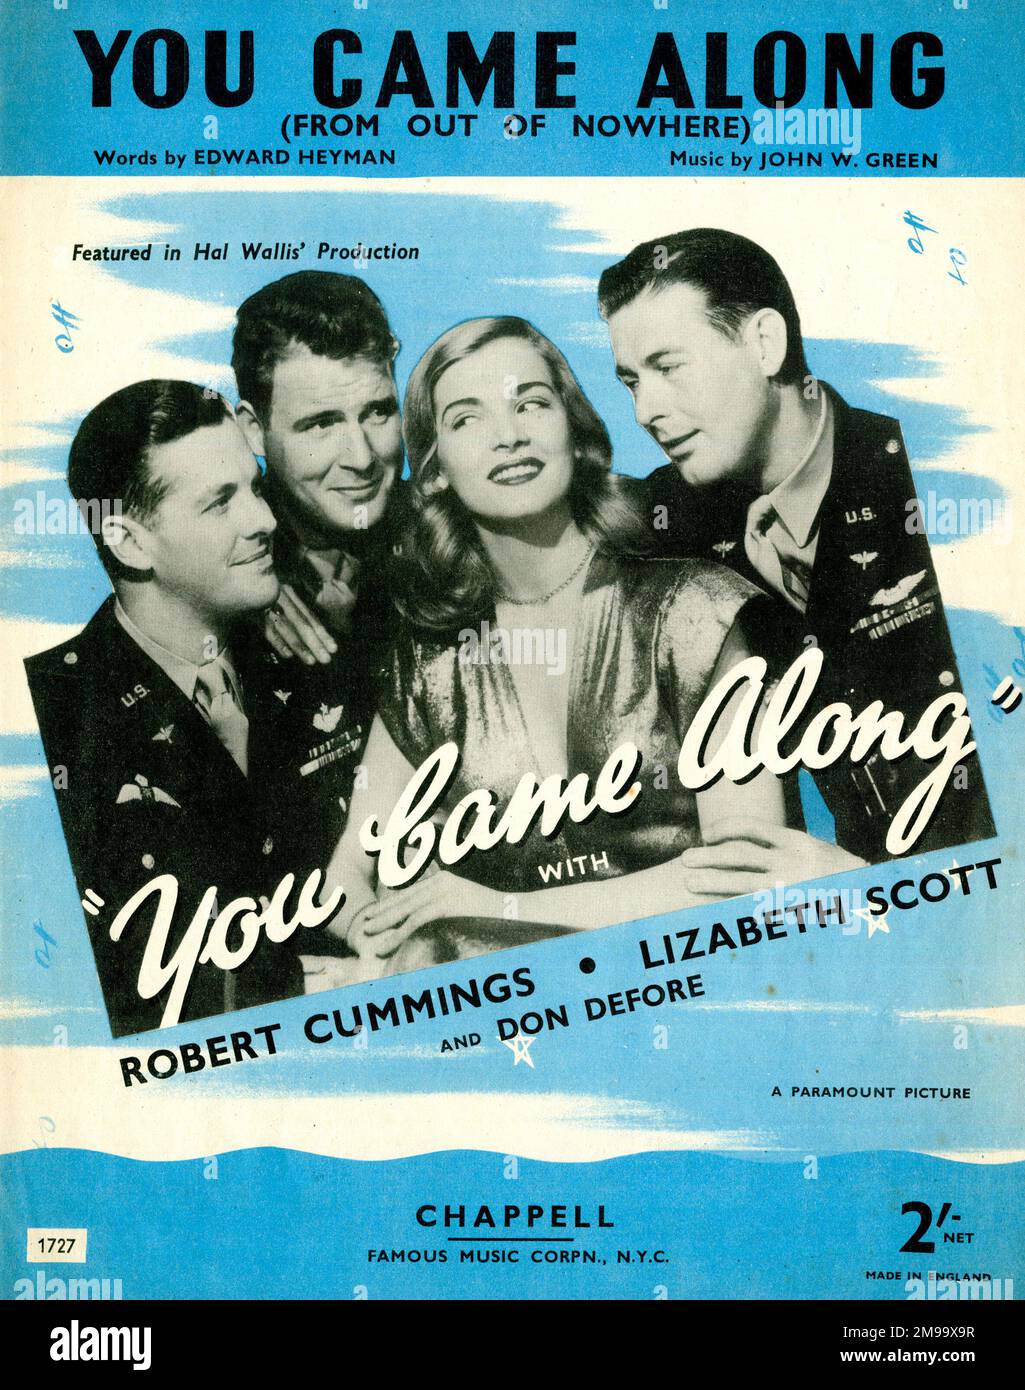 Music cover, You Came Along (From Out of Nowhere), words by Edward Heyman, music by John W Green, performed in the film You Came Along, with Robert Cummings, Lizabeth Scott and Don Defore. Stock Photo